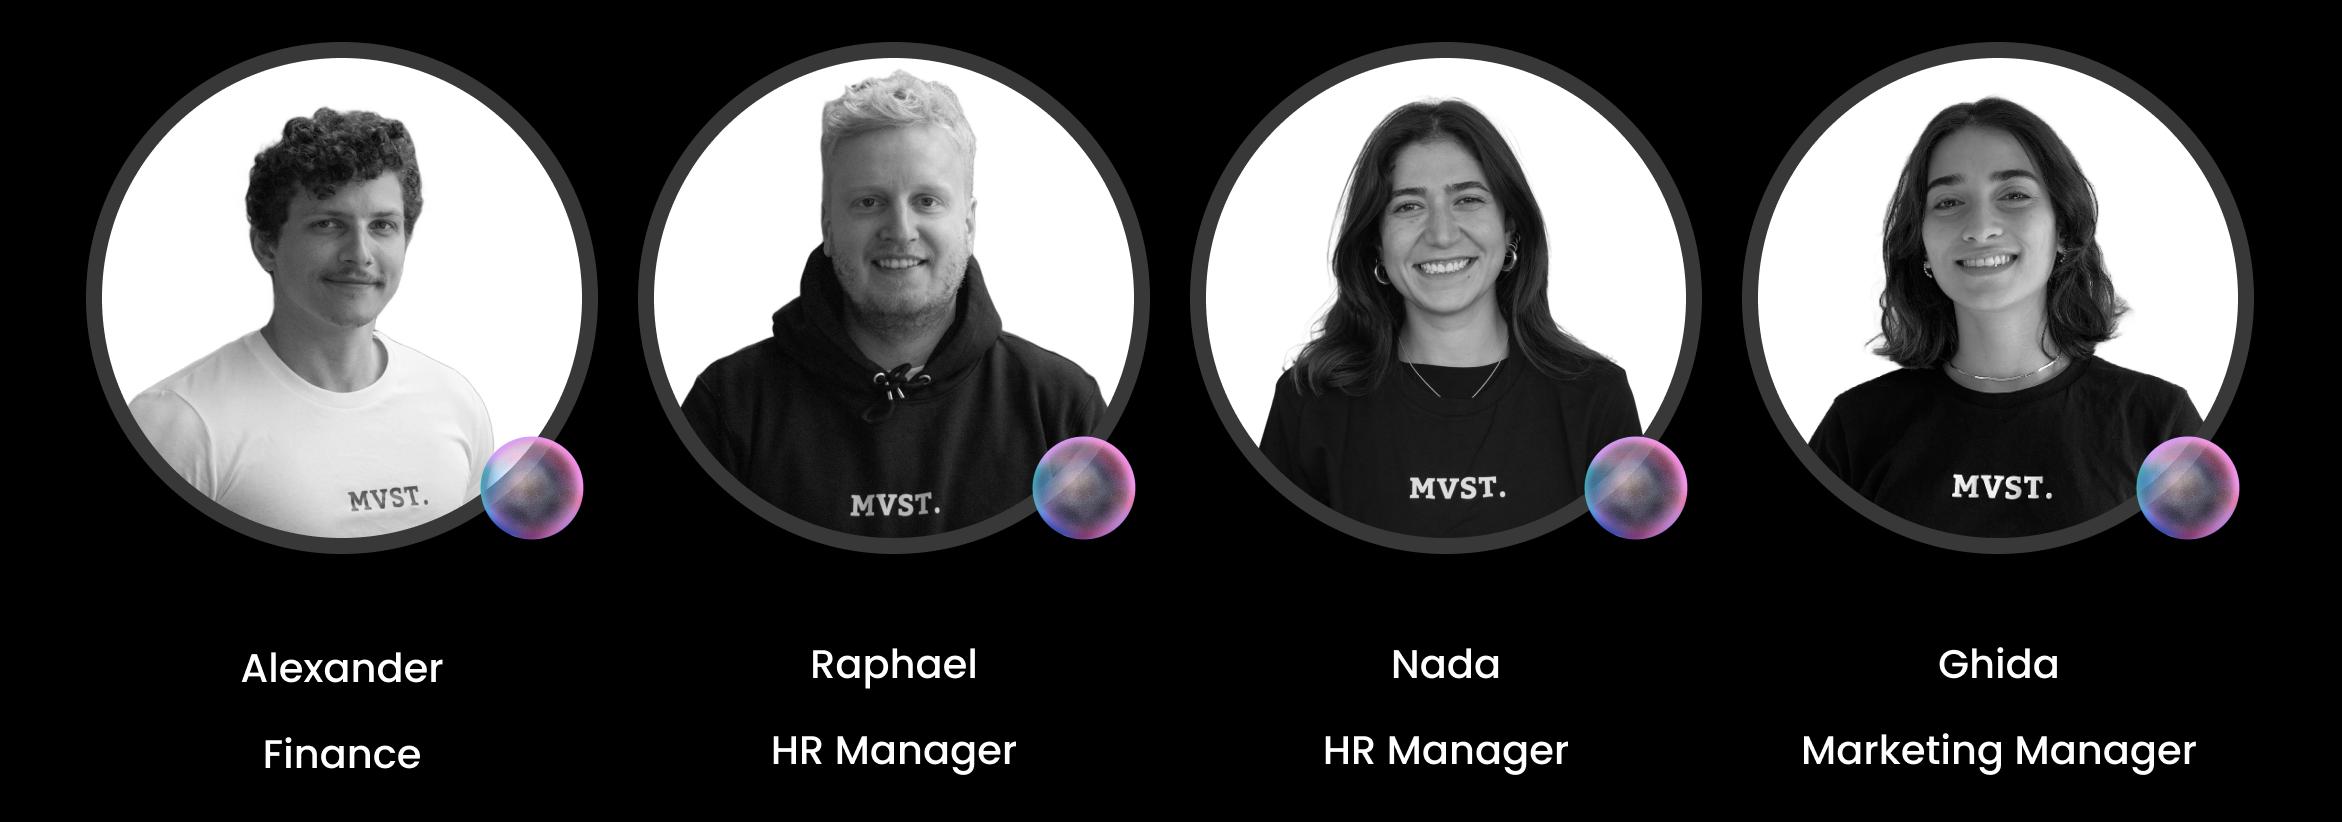 Photos, Names, and Roles of the Finance, HR, and Marketing Team at MVST